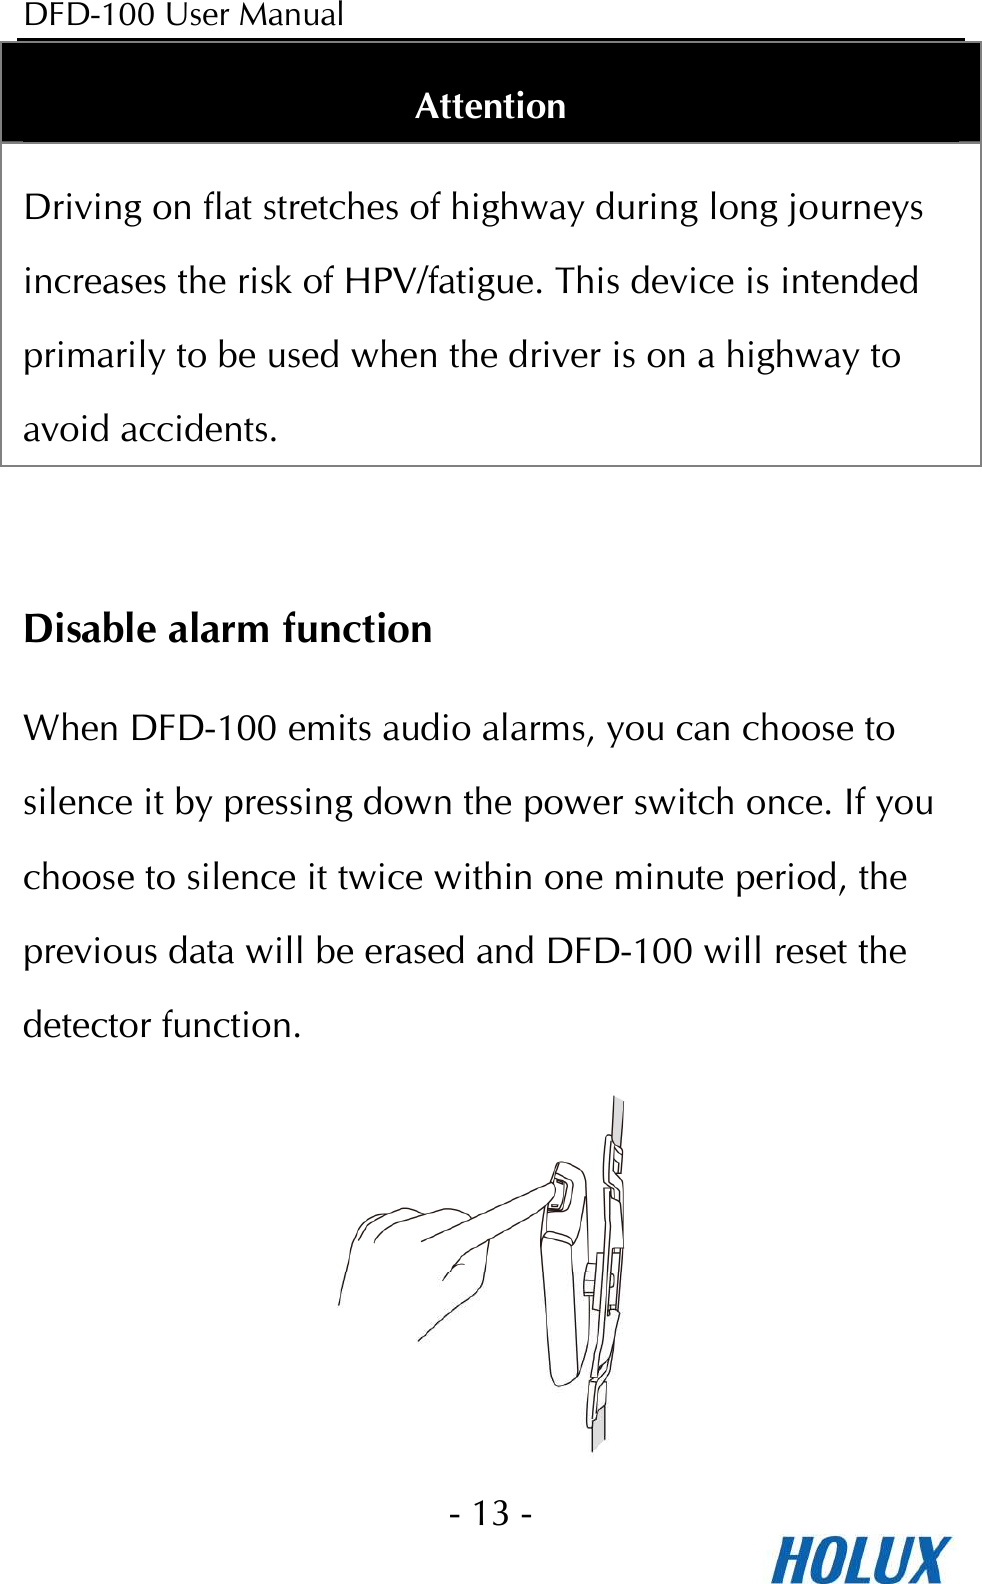 DFD-100 User Manual - 13 -  Attention Driving on flat stretches of highway during long journeys increases the risk of HPV/fatigue. This device is intended primarily to be used when the driver is on a highway to avoid accidents.  Disable alarm function When DFD-100 emits audio alarms, you can choose to silence it by pressing down the power switch once. If you choose to silence it twice within one minute period, the previous data will be erased and DFD-100 will reset the detector function.        